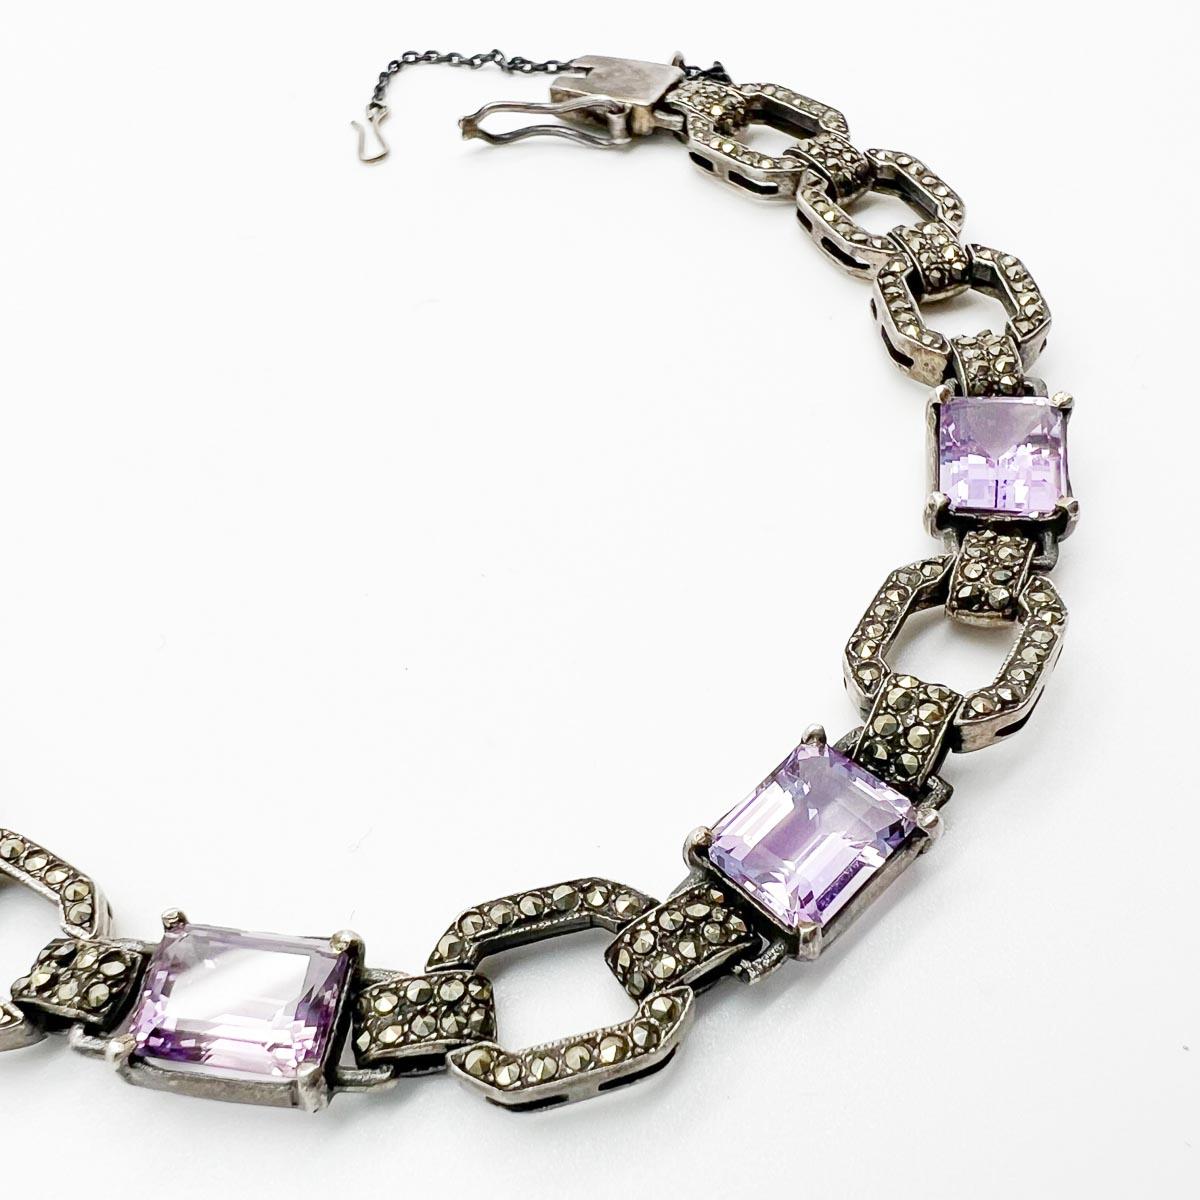 A demure and elegant Vintage Amethyst Marcasite Bracelet. Crafted in sterling silver and set with  marcasites and amethyst pastes that capture the light to perfection. A wonderful piece of original 1930s jewellery that will never cease to